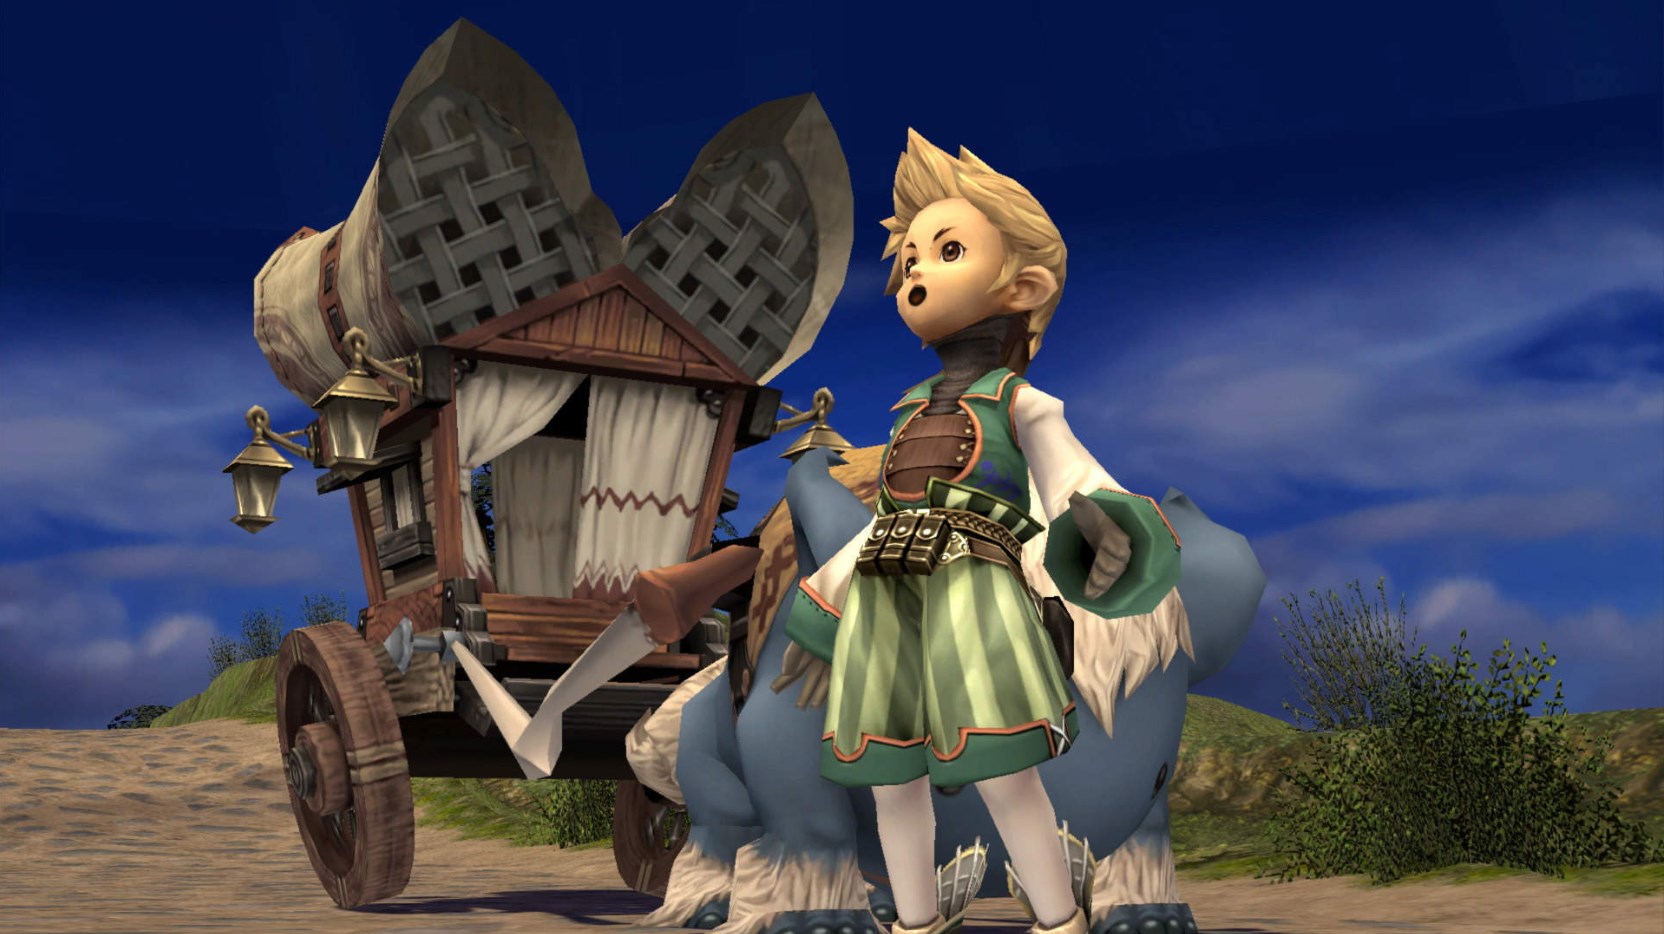 The main character from Crystal Chronicles stands in front of a caravan, shocked